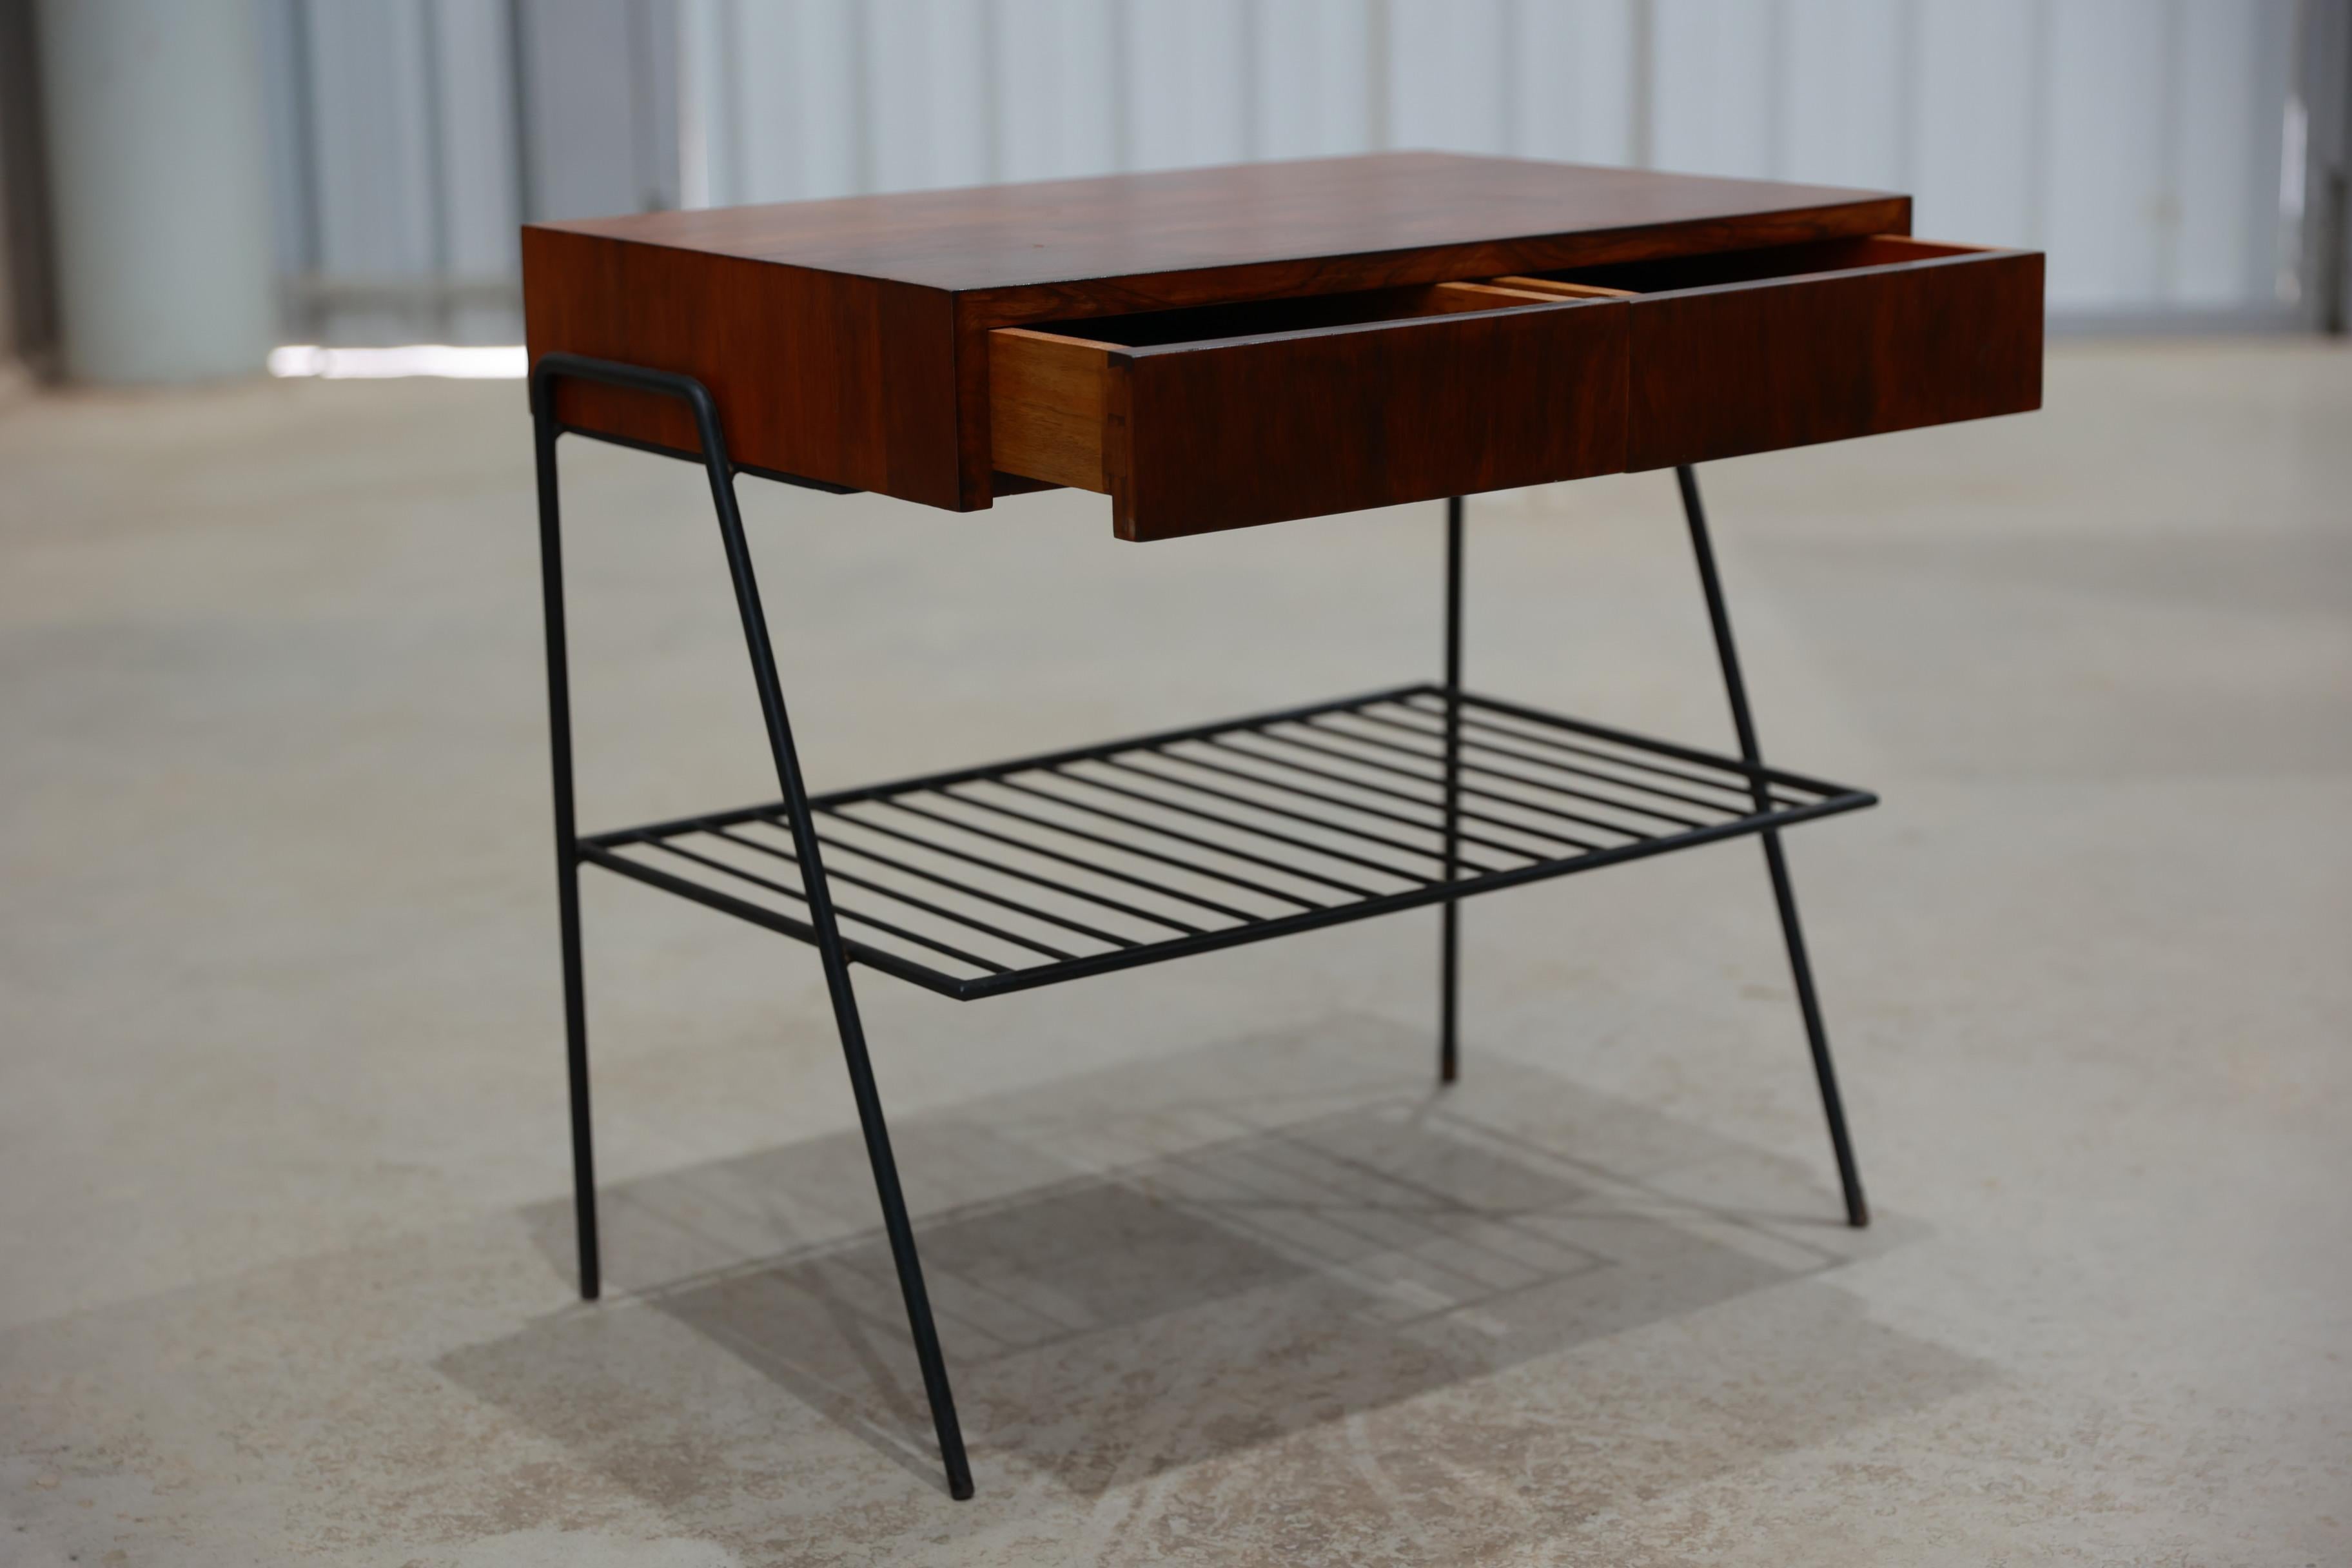 Brazilian Modern Side table in Hardwood and Metal, Unknown, c. 1950 For Sale 7